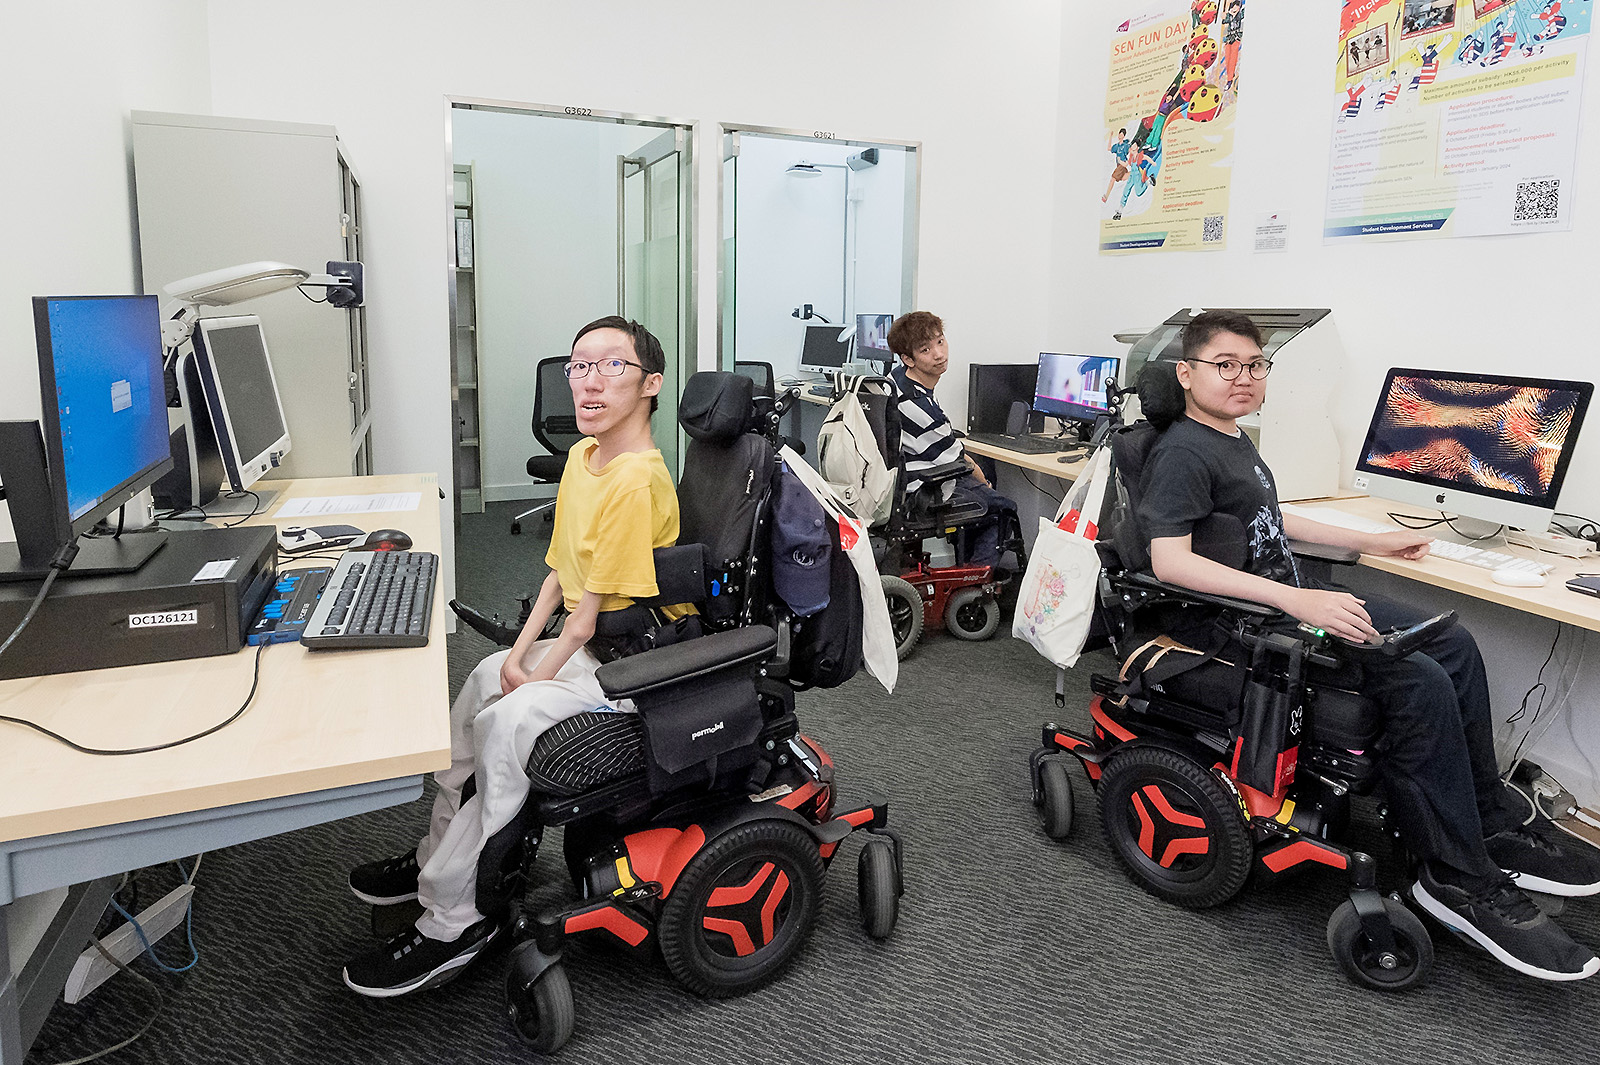 Freshmen were introduced to the barrier-free learning environment during a campus tour. (From left) Leung Pui Kin, a CityU graduate in Electrical Engineering, Lau Pak-hei and Yang Letian.